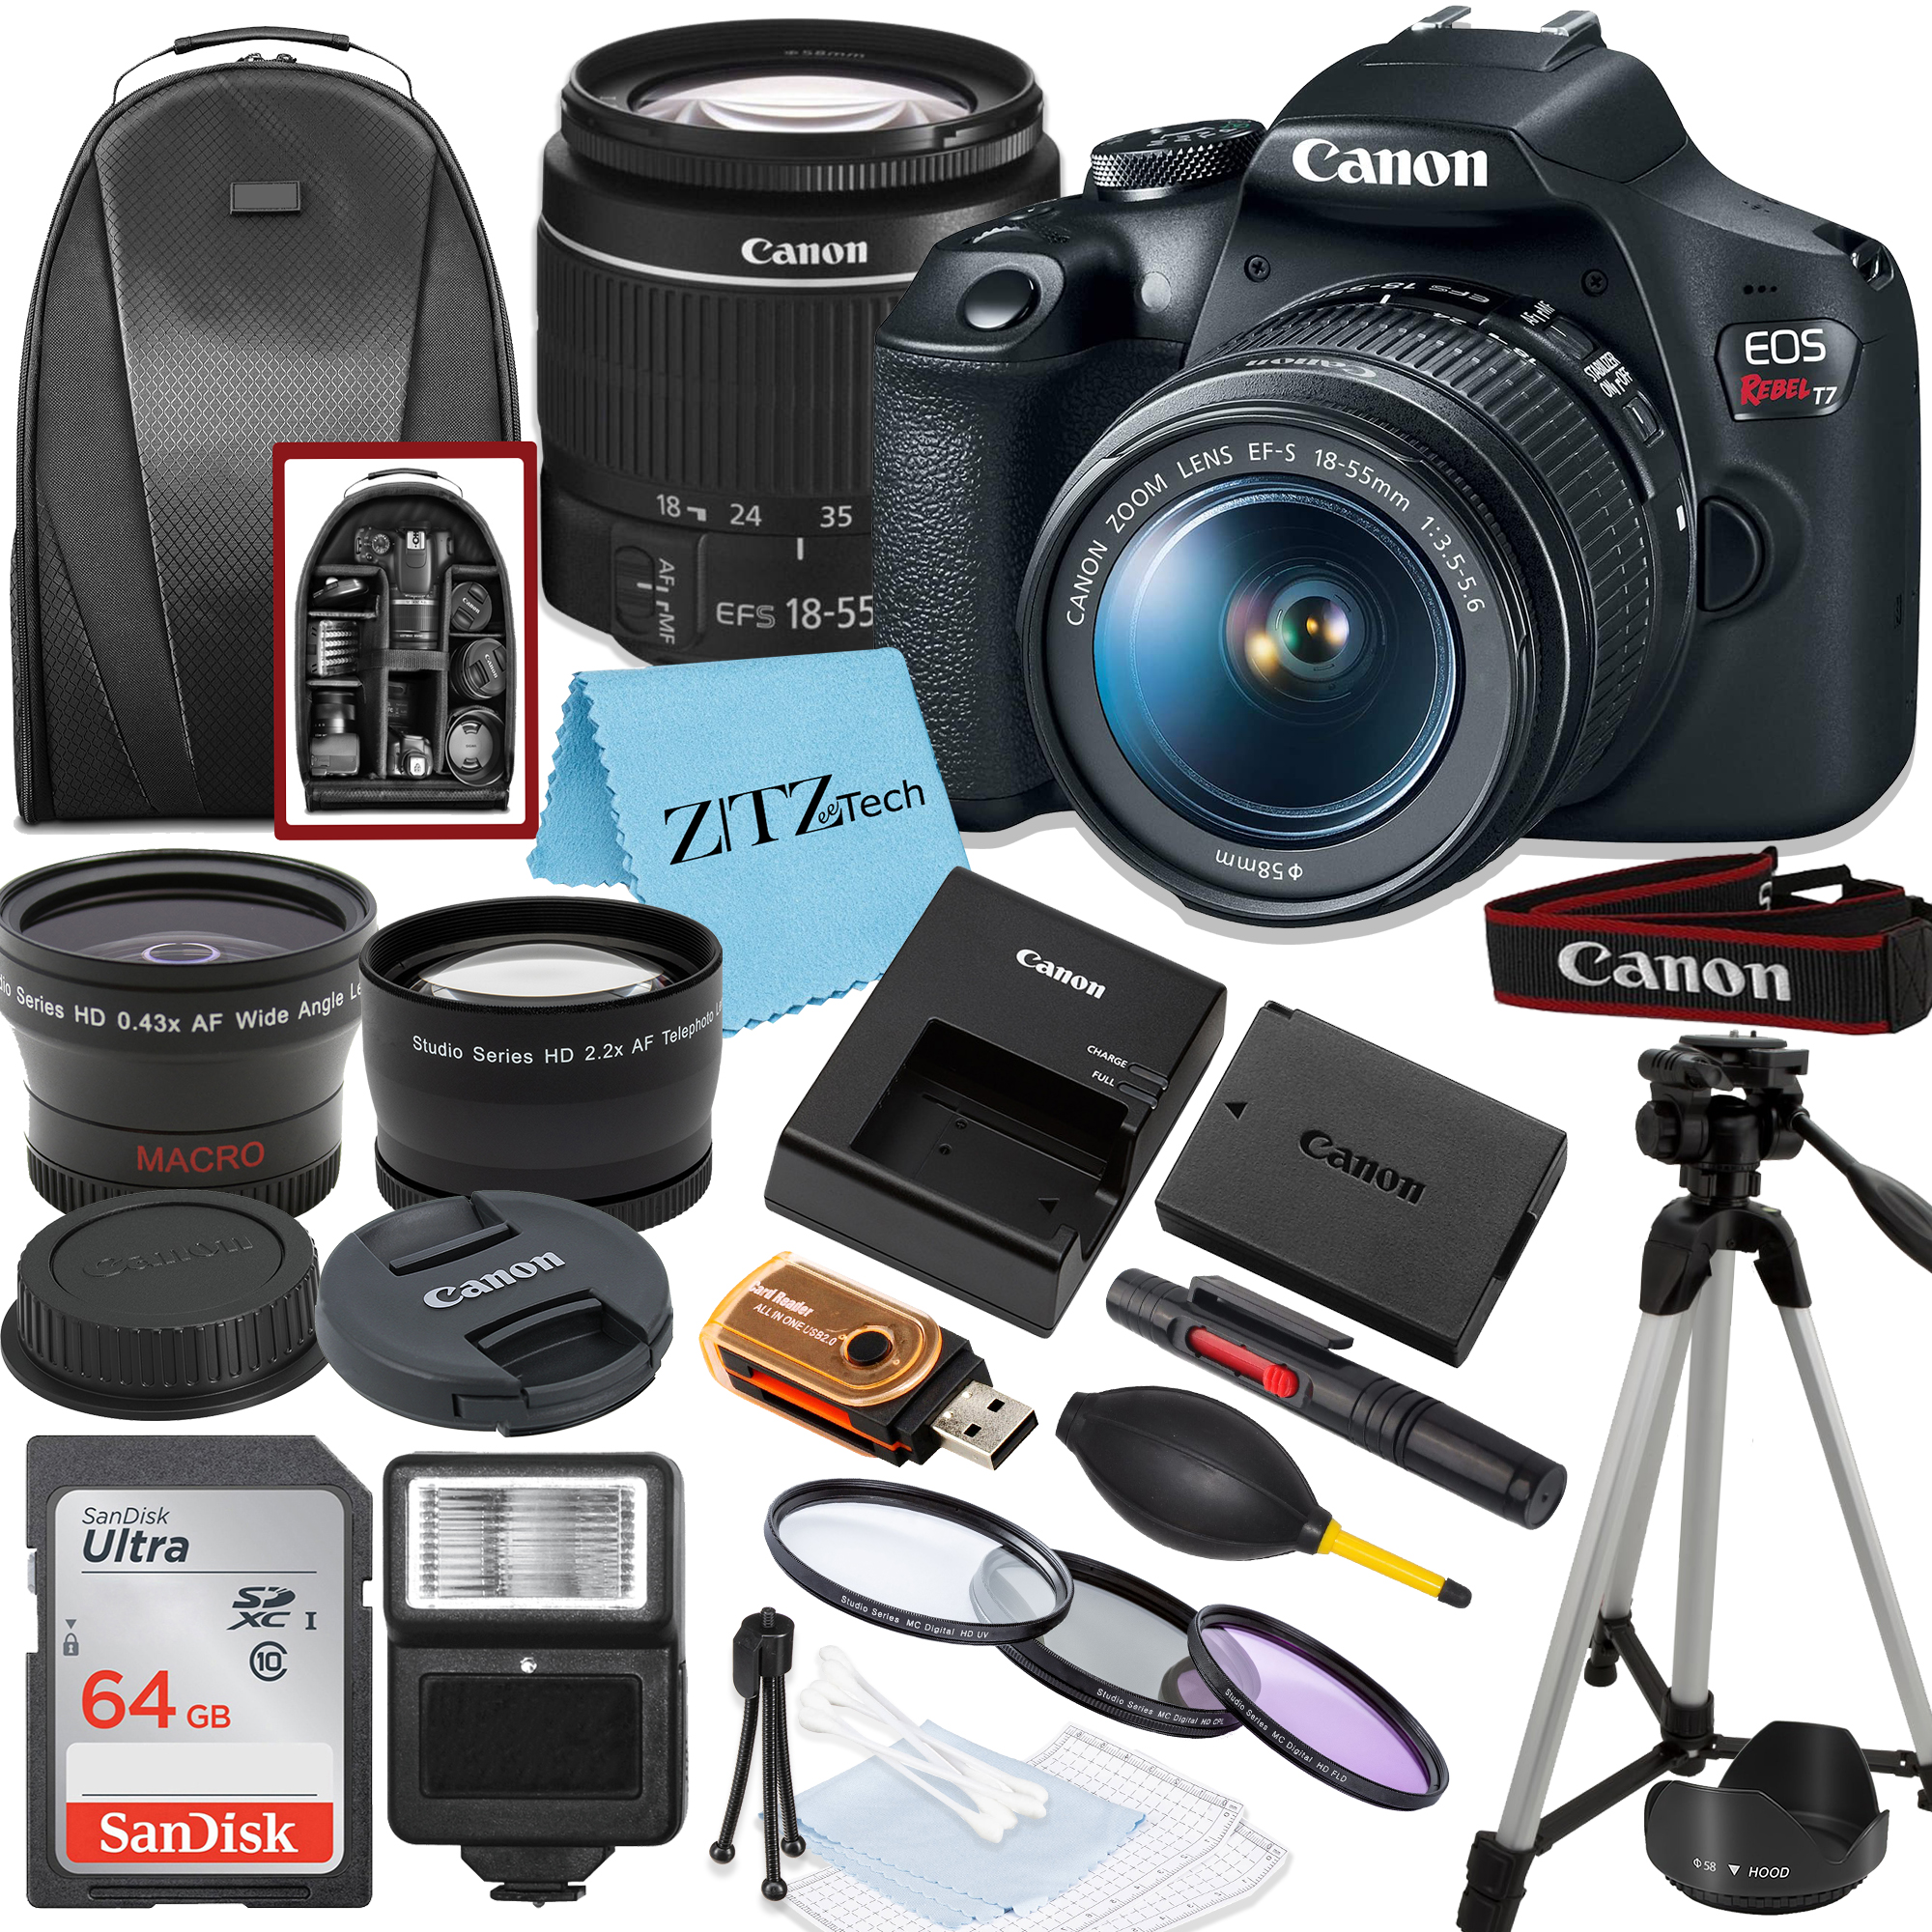 Canon EOS Rebel T7 DSLR Camera Bundle with 18-55mm Zoom Lens, SanDisk 64GB Memory Card, Tripod, Backpack and ZeeTech Accessory